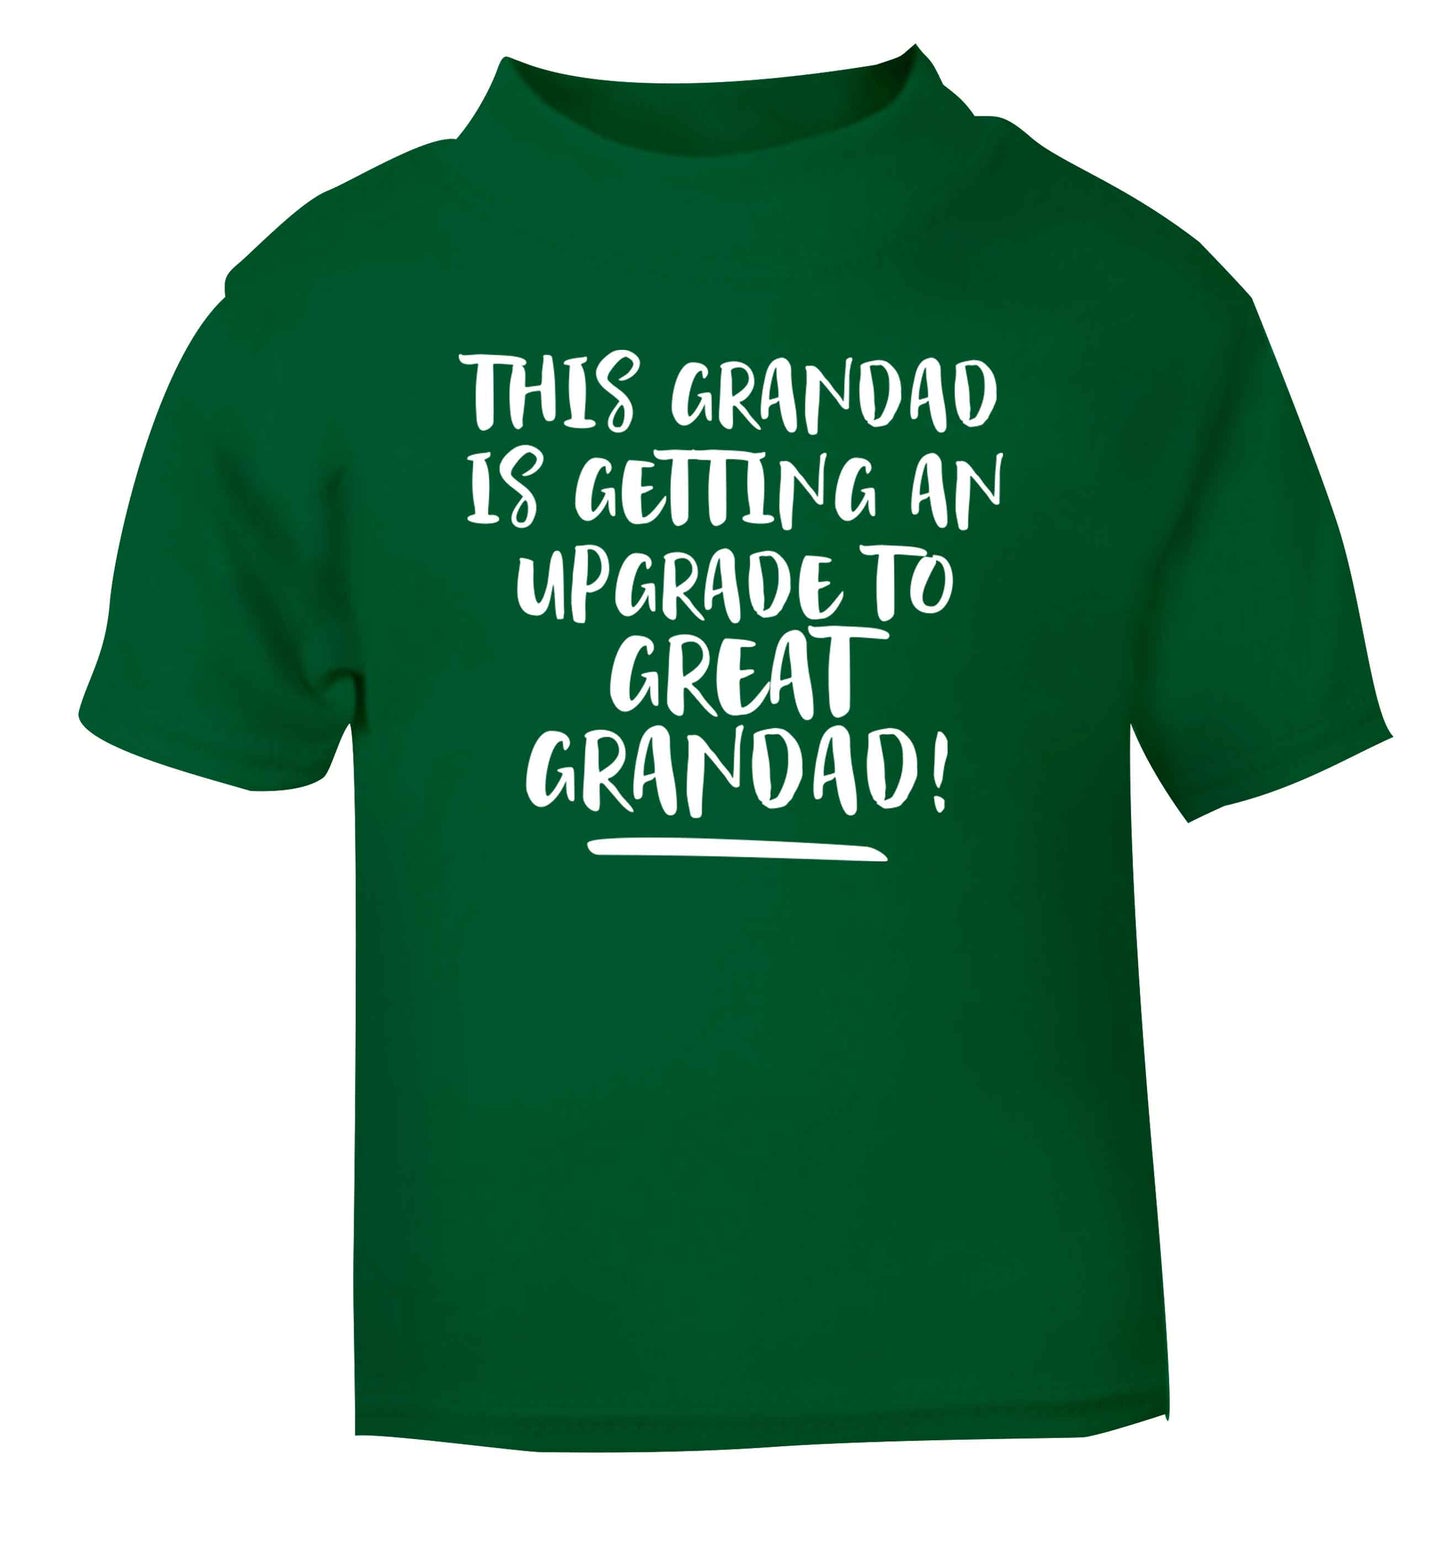 This grandad is getting an upgrade to great grandad! green Baby Toddler Tshirt 2 Years